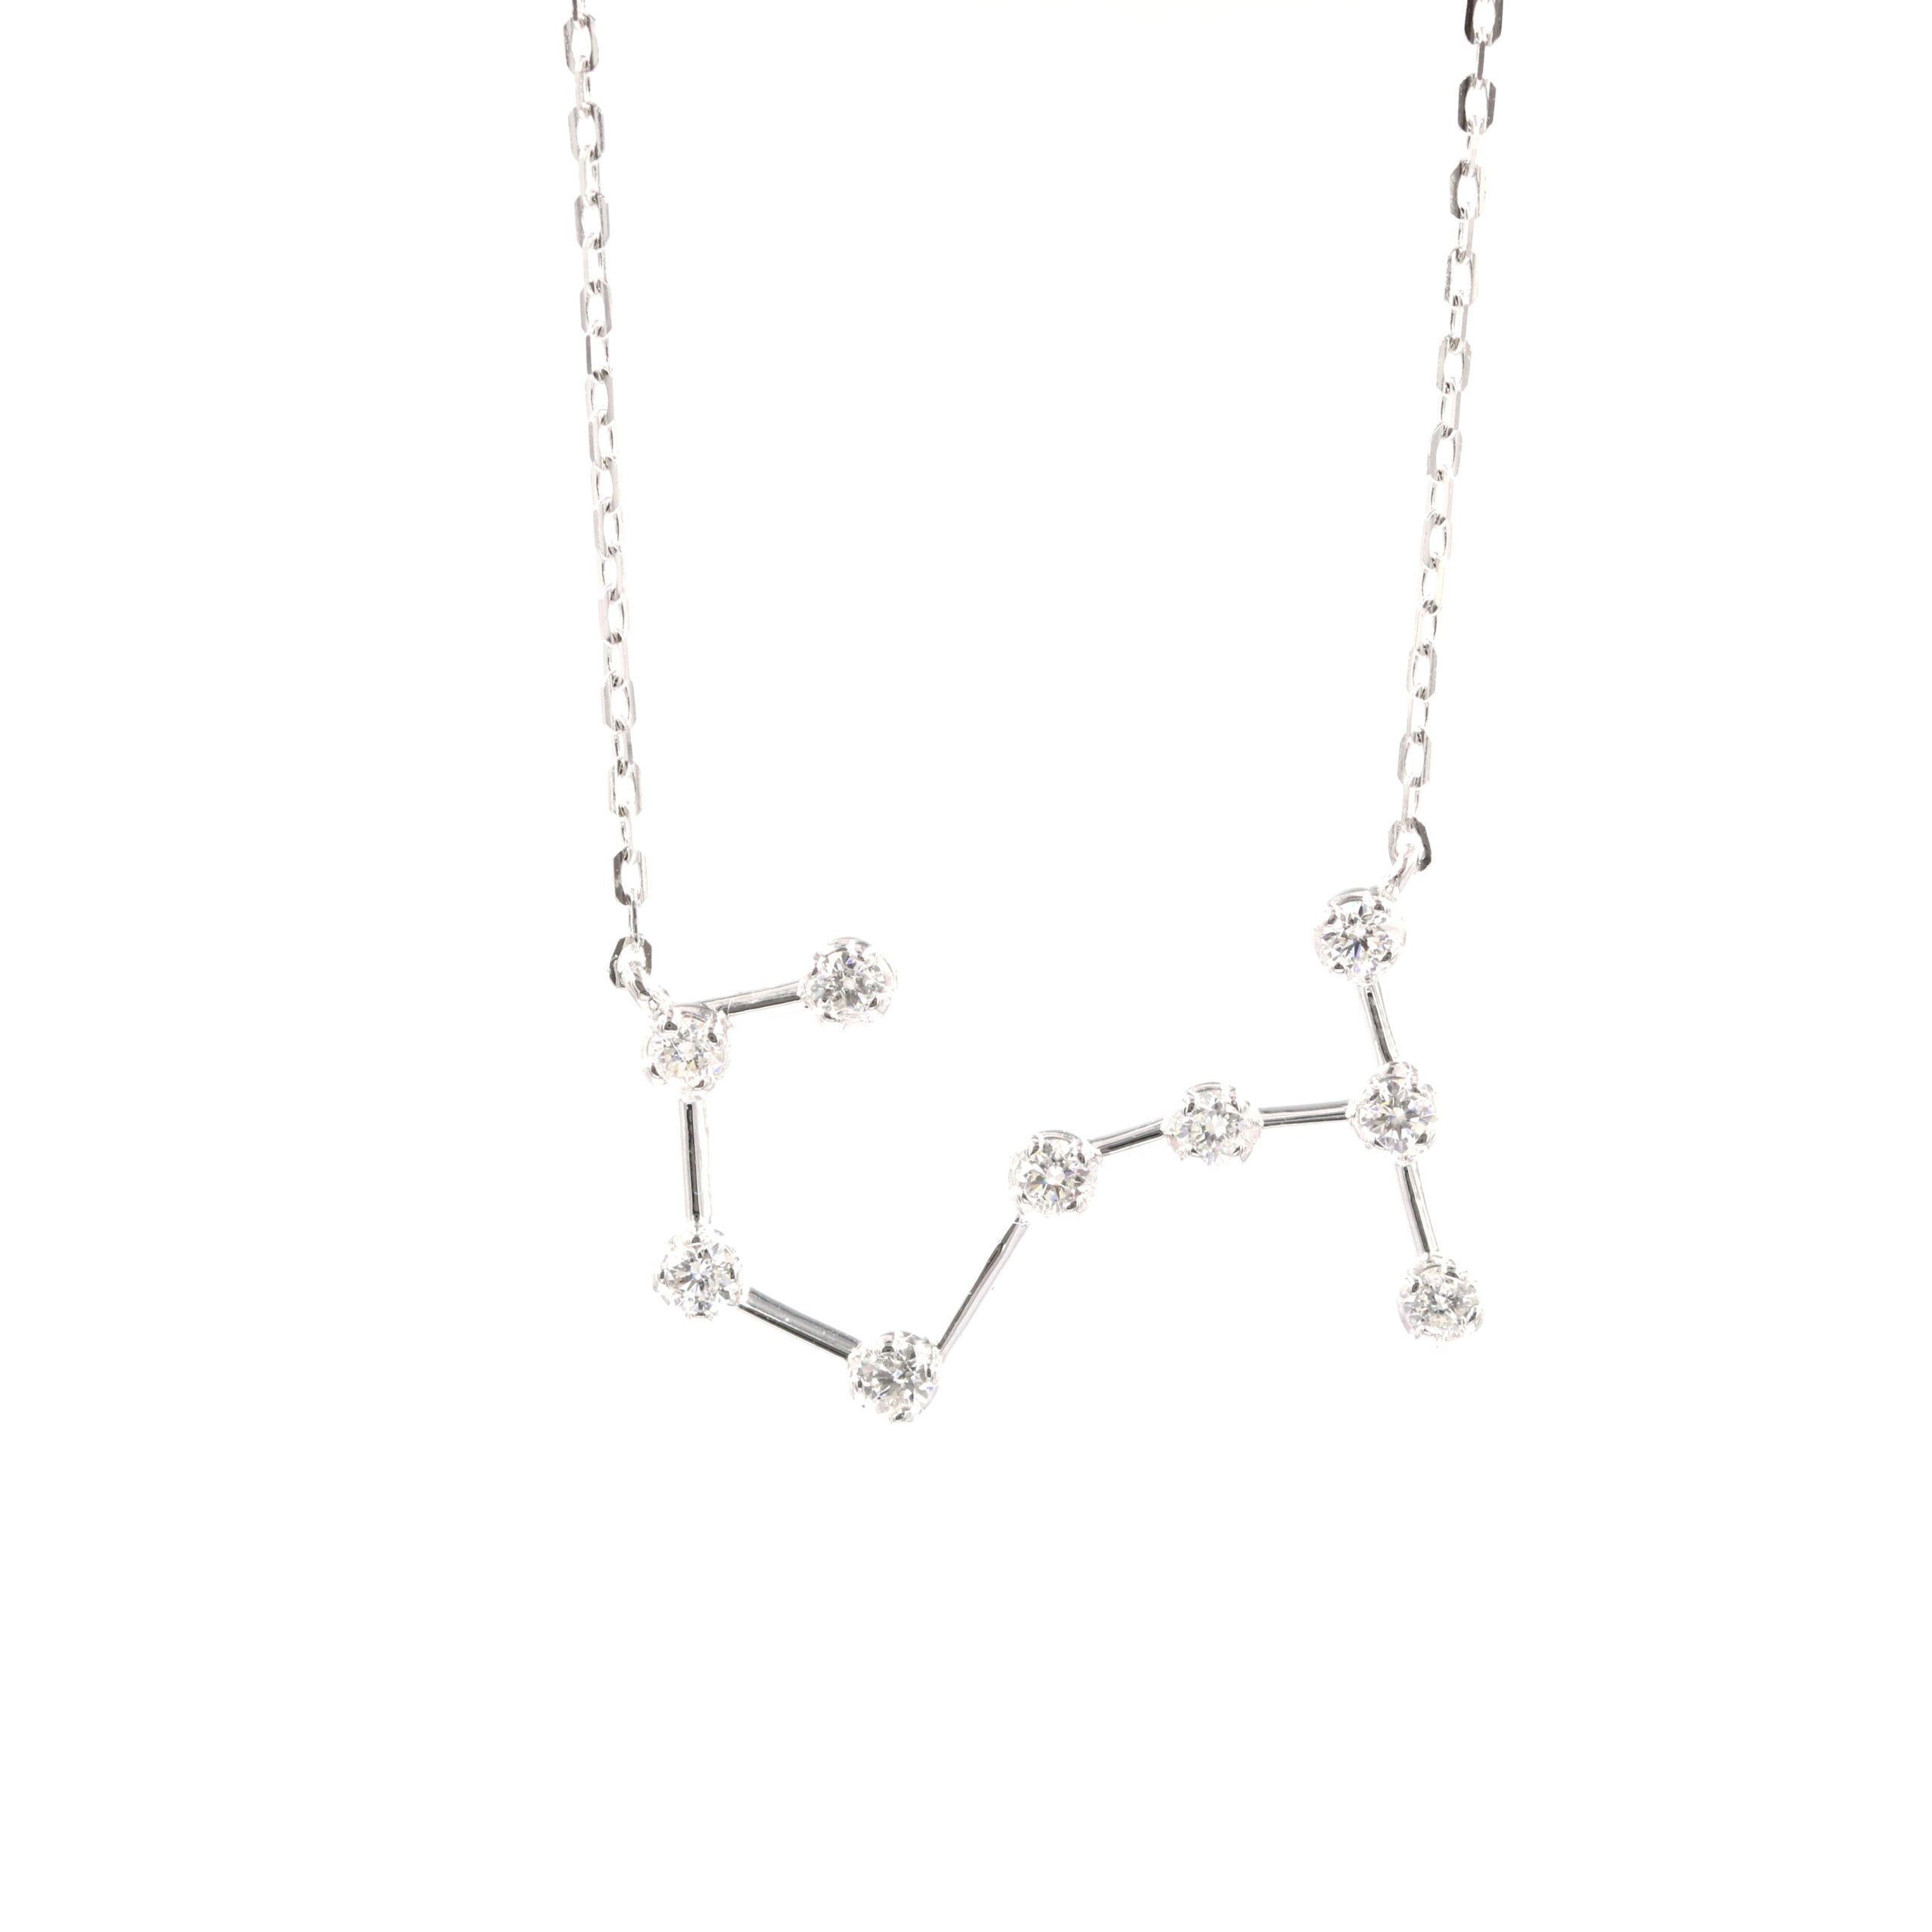 Diamond Constellation Necklace 9k Gold | Zohreh V. Jewelry | Wolf & Badger